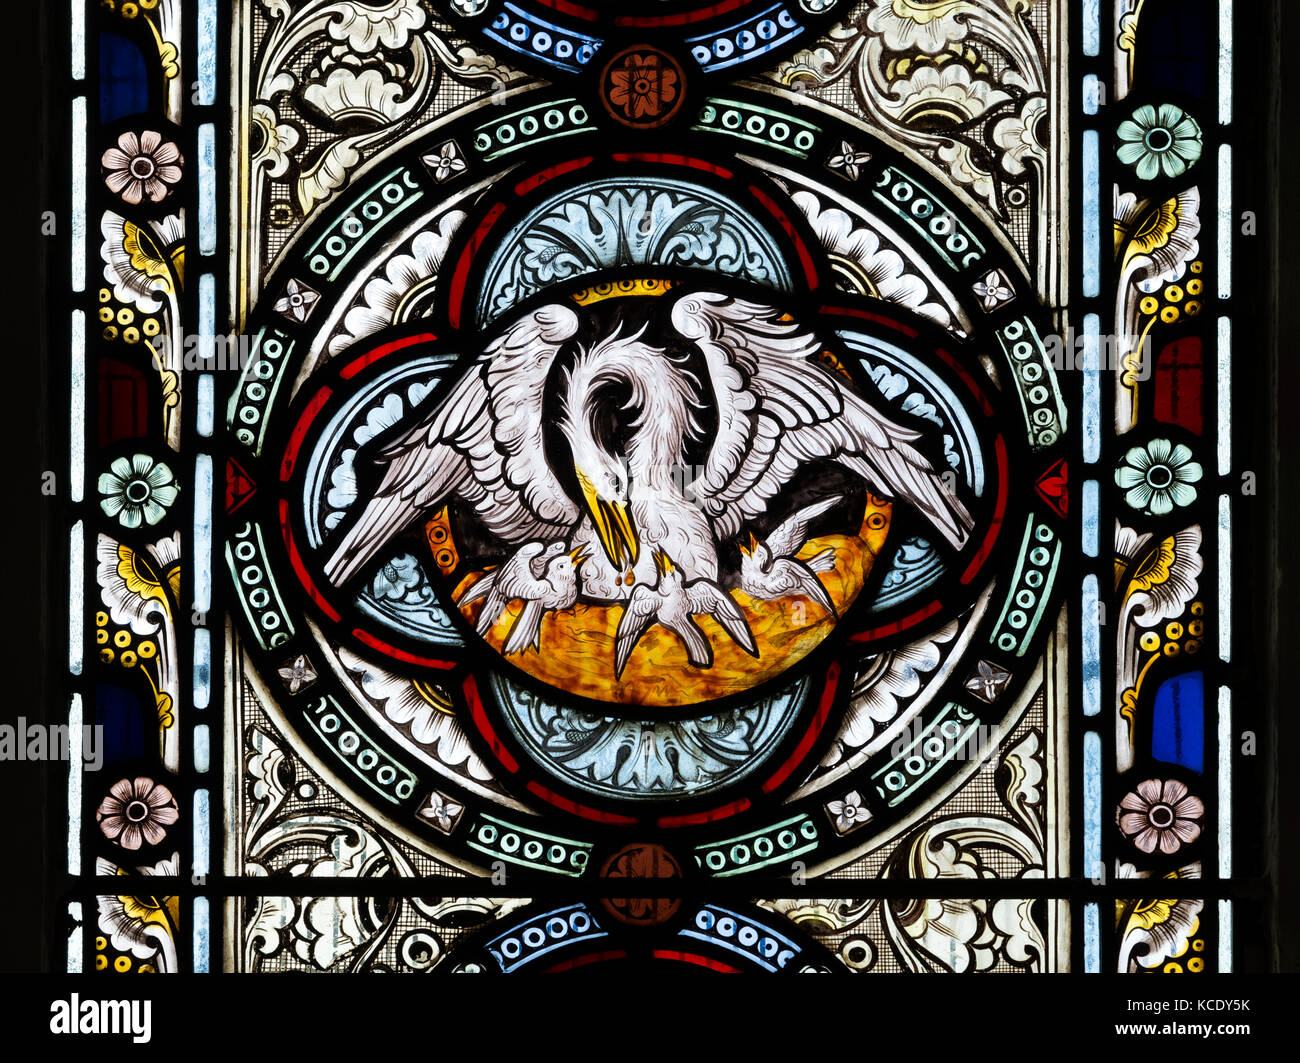 Pelican in its piety stained glass, St. John the Baptist Church, Abthorpe, Northamptonshire, England, UK Stock Photo